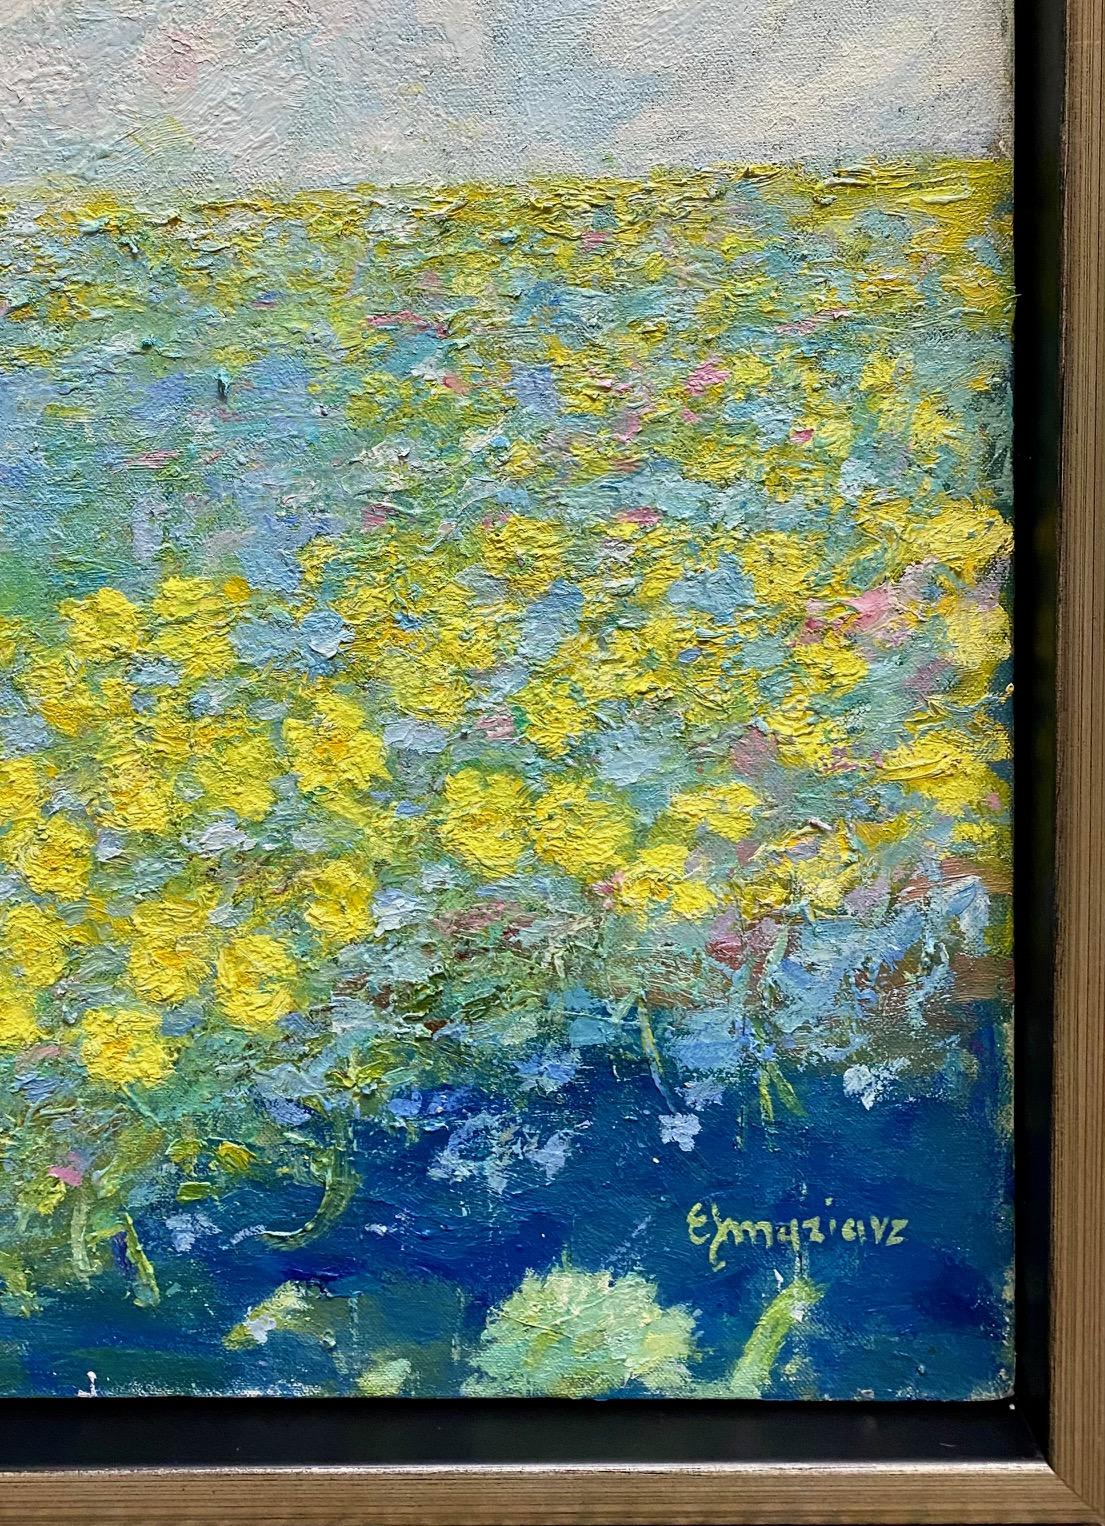 Floating Flowers, original 40x30 abstract expressionist landscape - Gray Landscape Painting by Eugene Maziarz